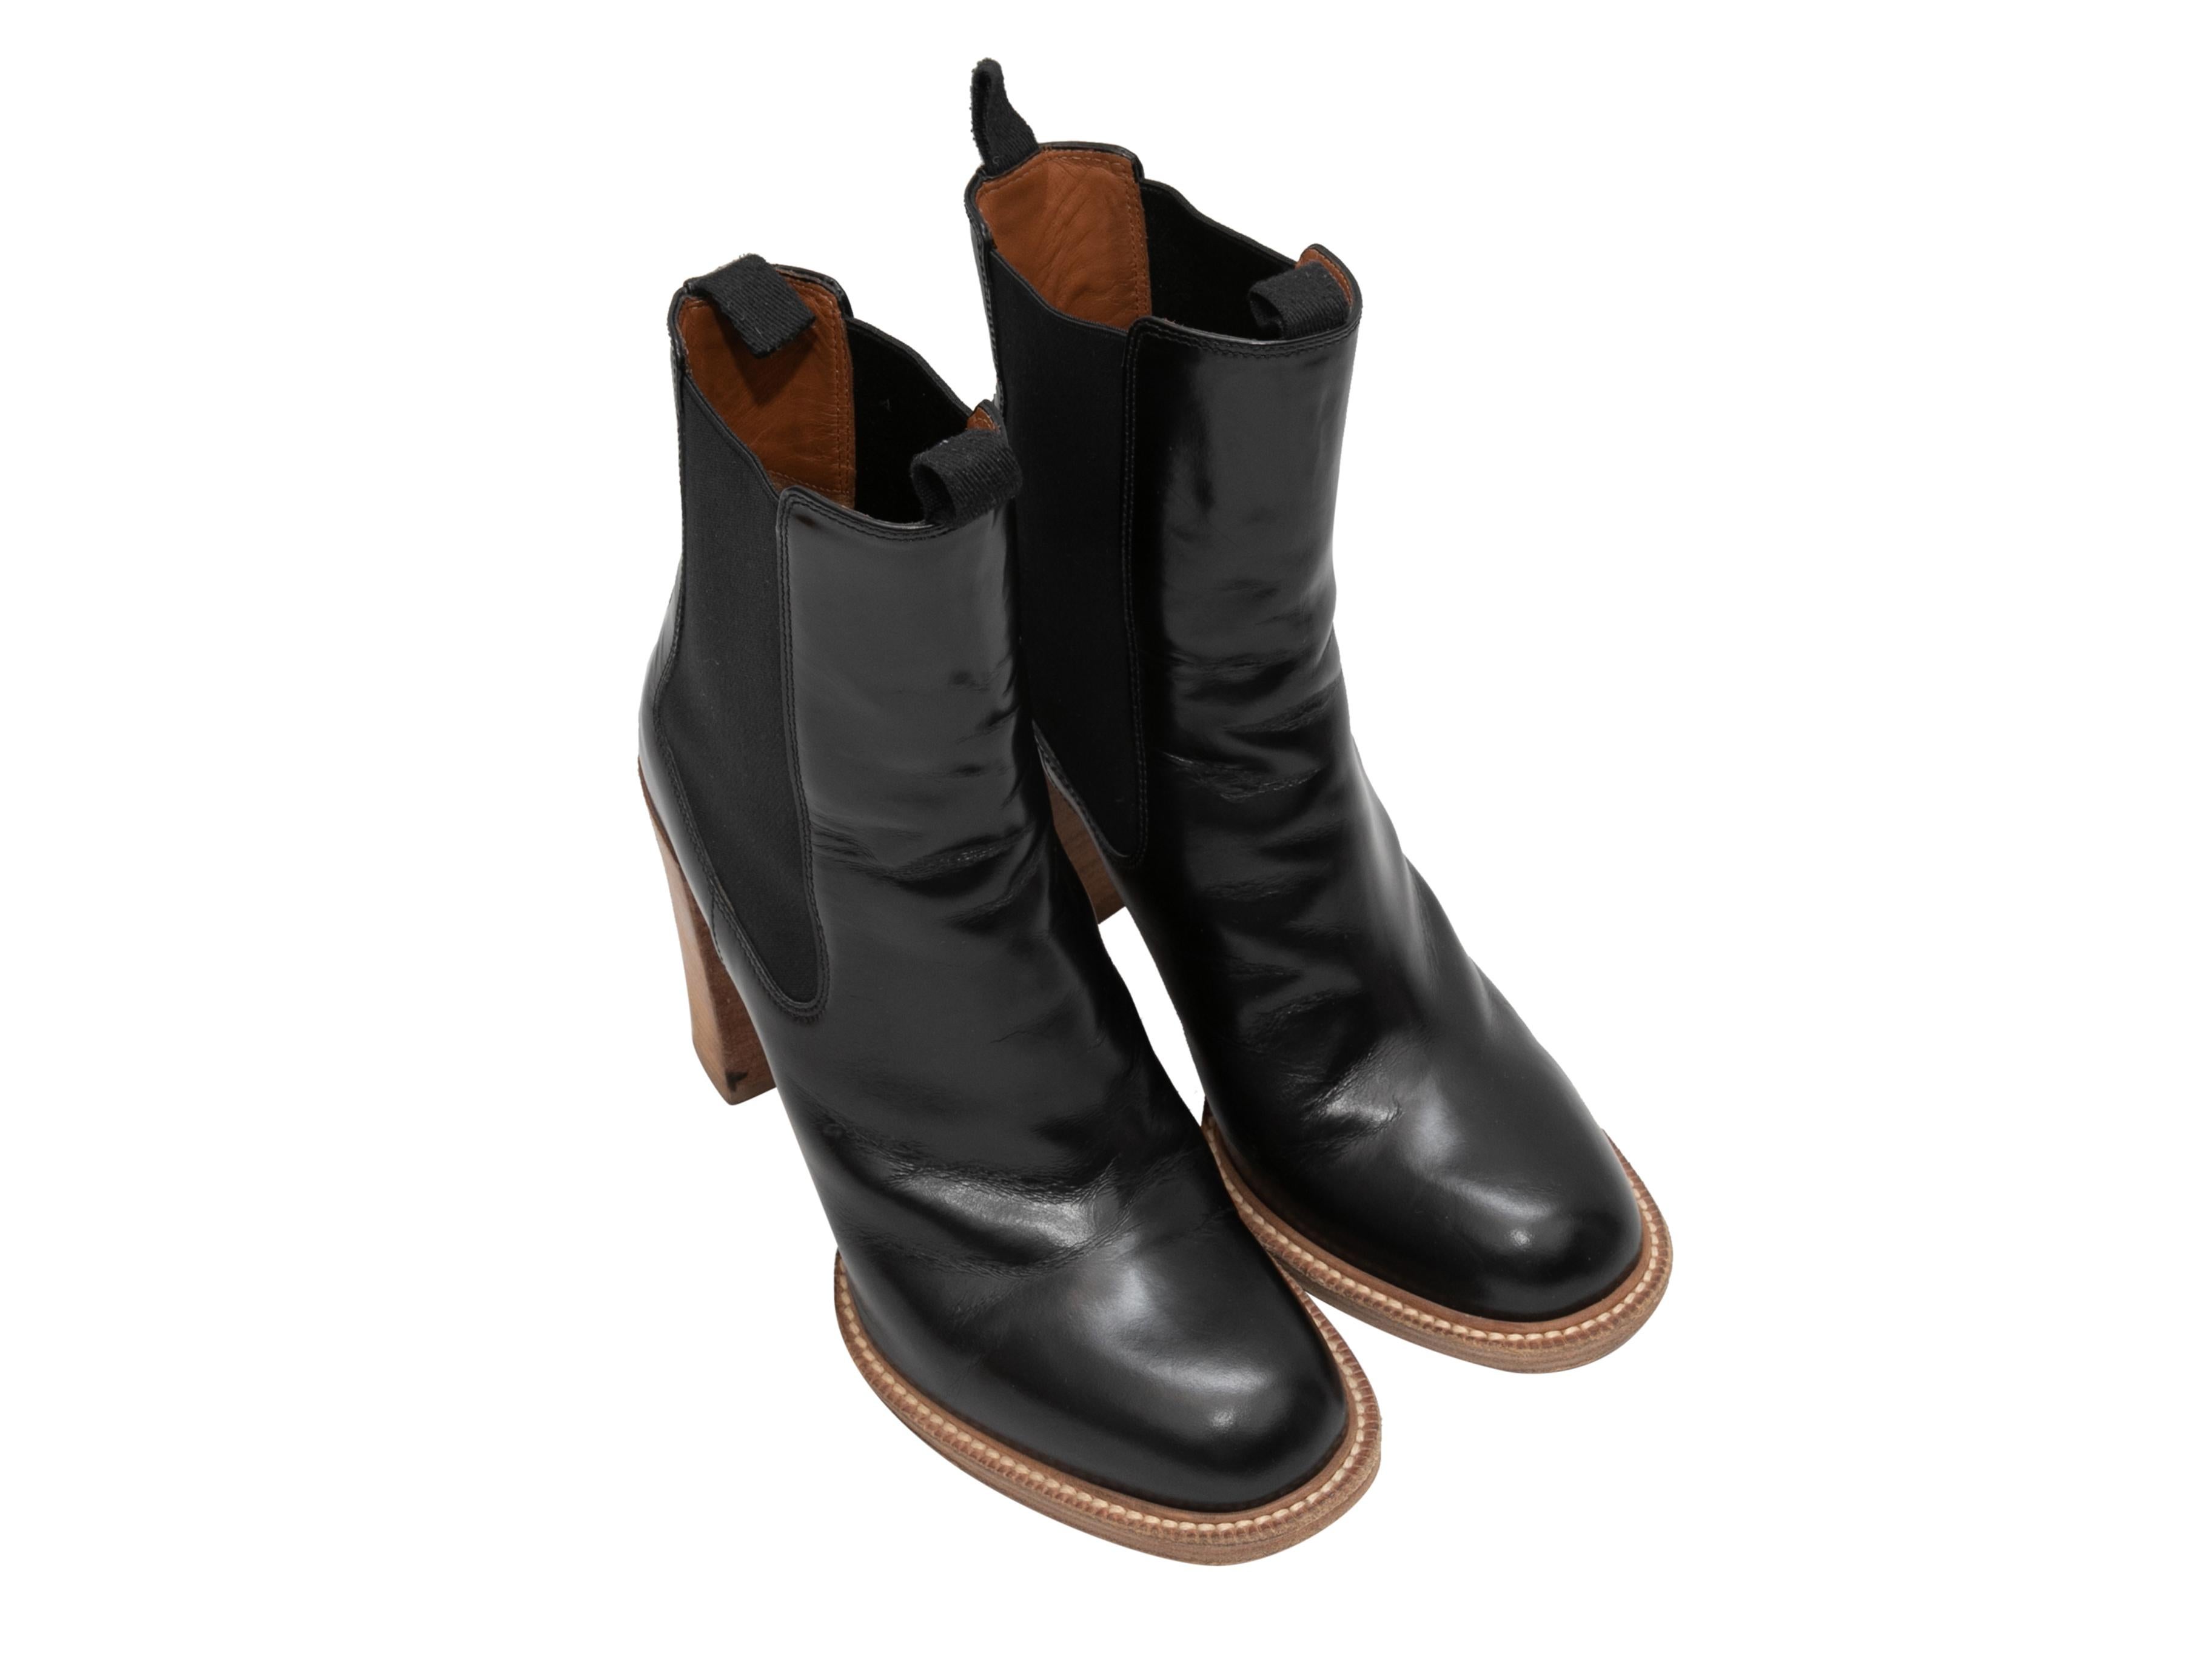 Black leather heeled ankle boots by Celine. Elasticized gores at sides. Stacked heels. 5.25